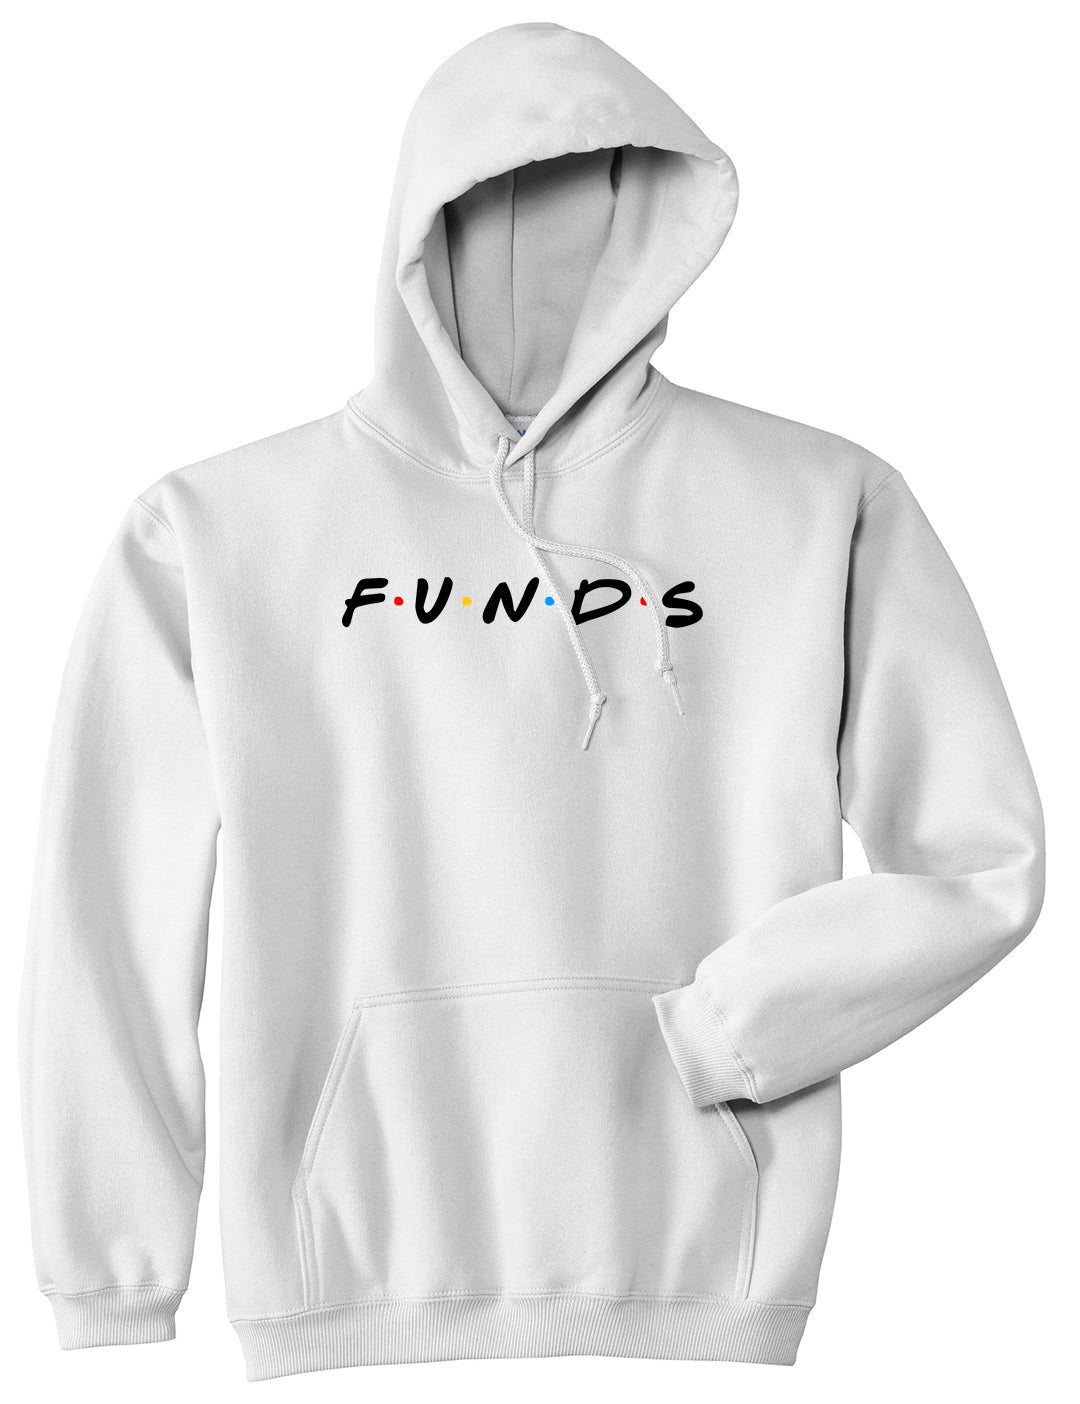 Funds Friends Mens Pullover Hoodie White